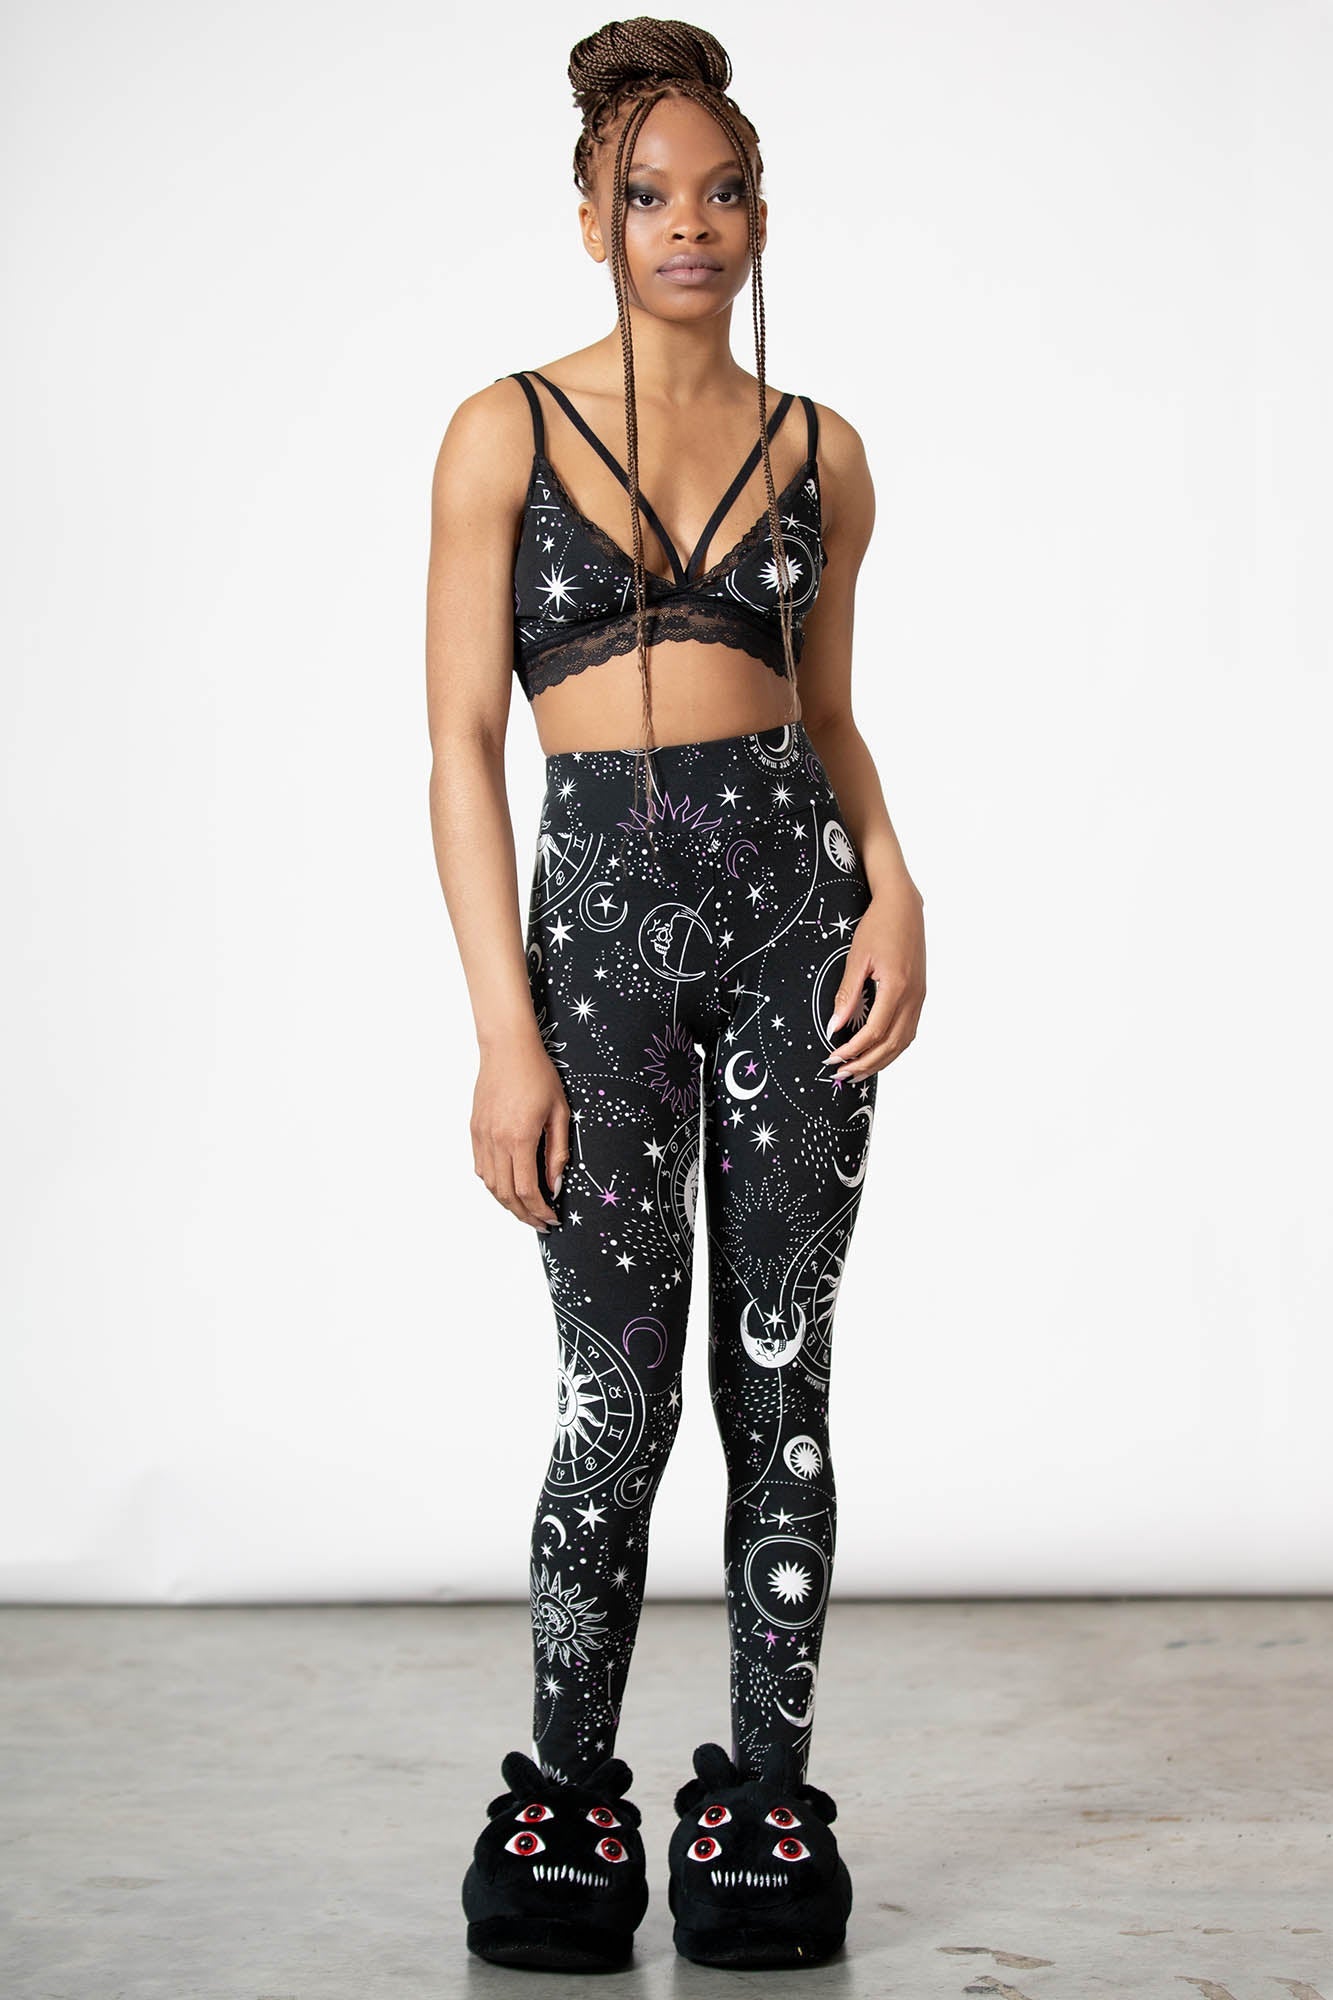 Find Out Where To Get The Pants  Galaxy leggings, Elastic leggings, Style